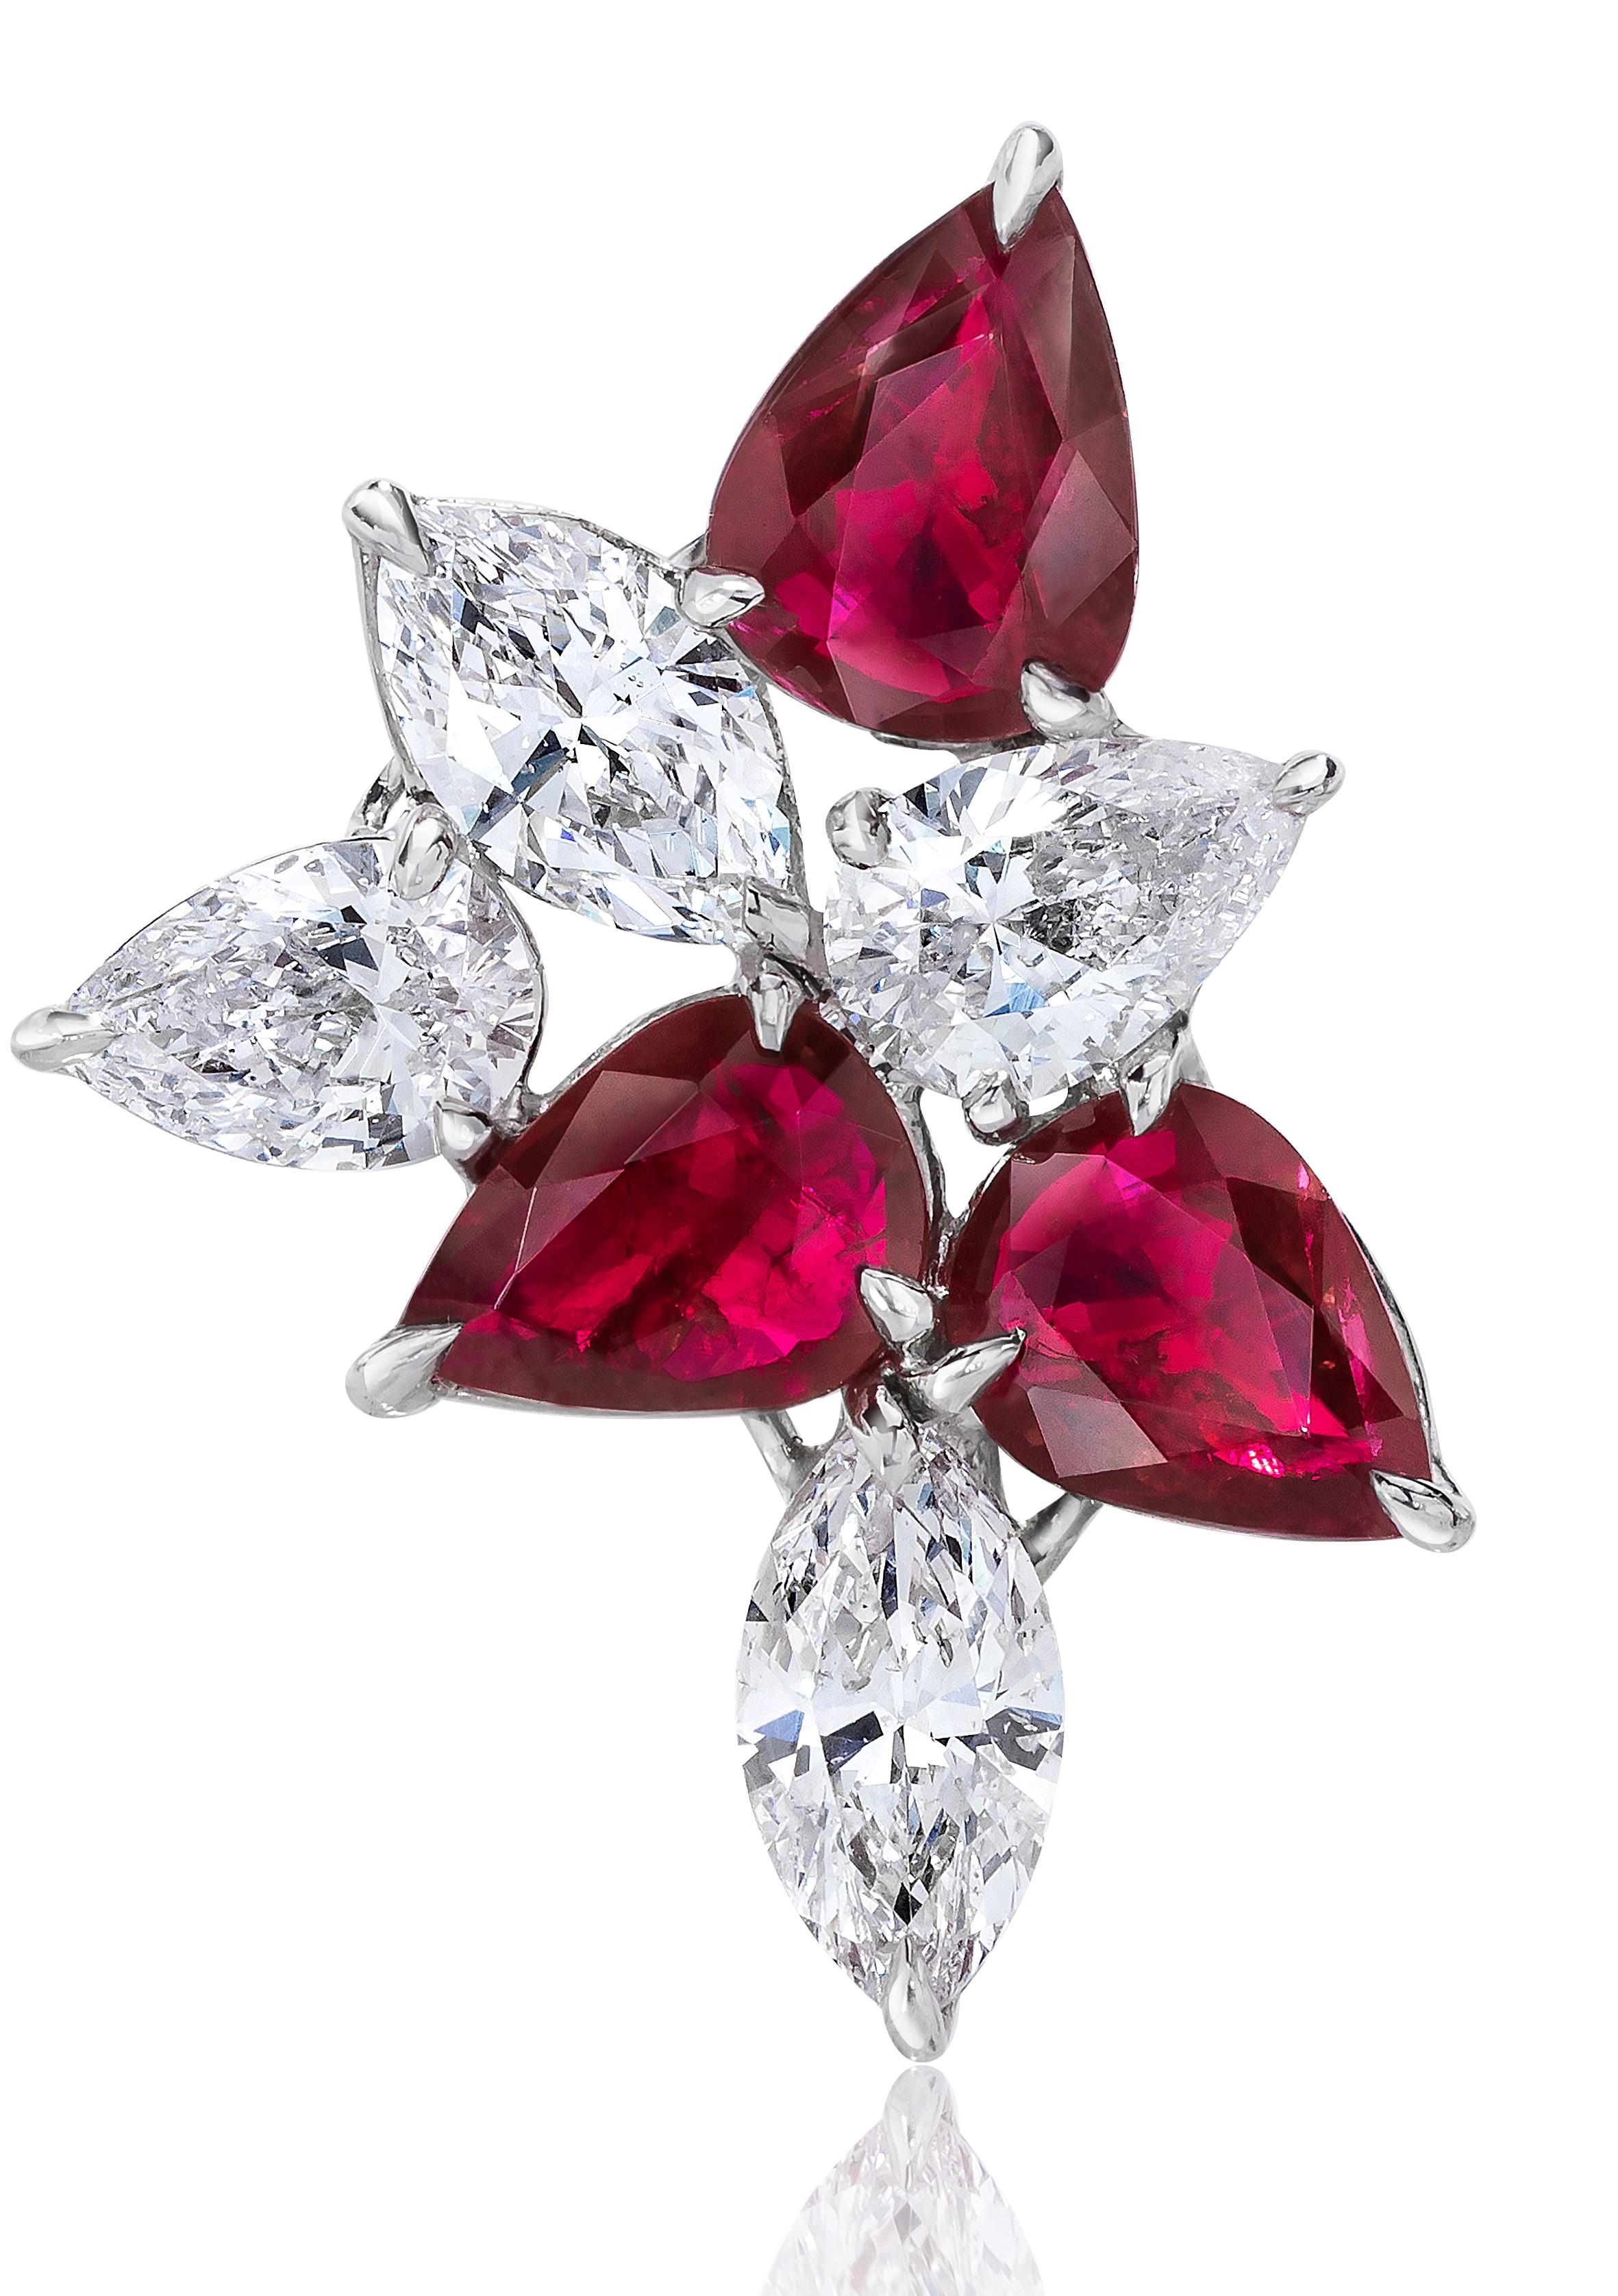 The Classic Cluster Earring. Redefined. Set with Rubies and Diamonds and Set in Platinum and 18 Karat White Gold.

Rubies totaling 5.34 Carats.
Diamonds Totaling 3.67 Carats.
9.01 Carats Total